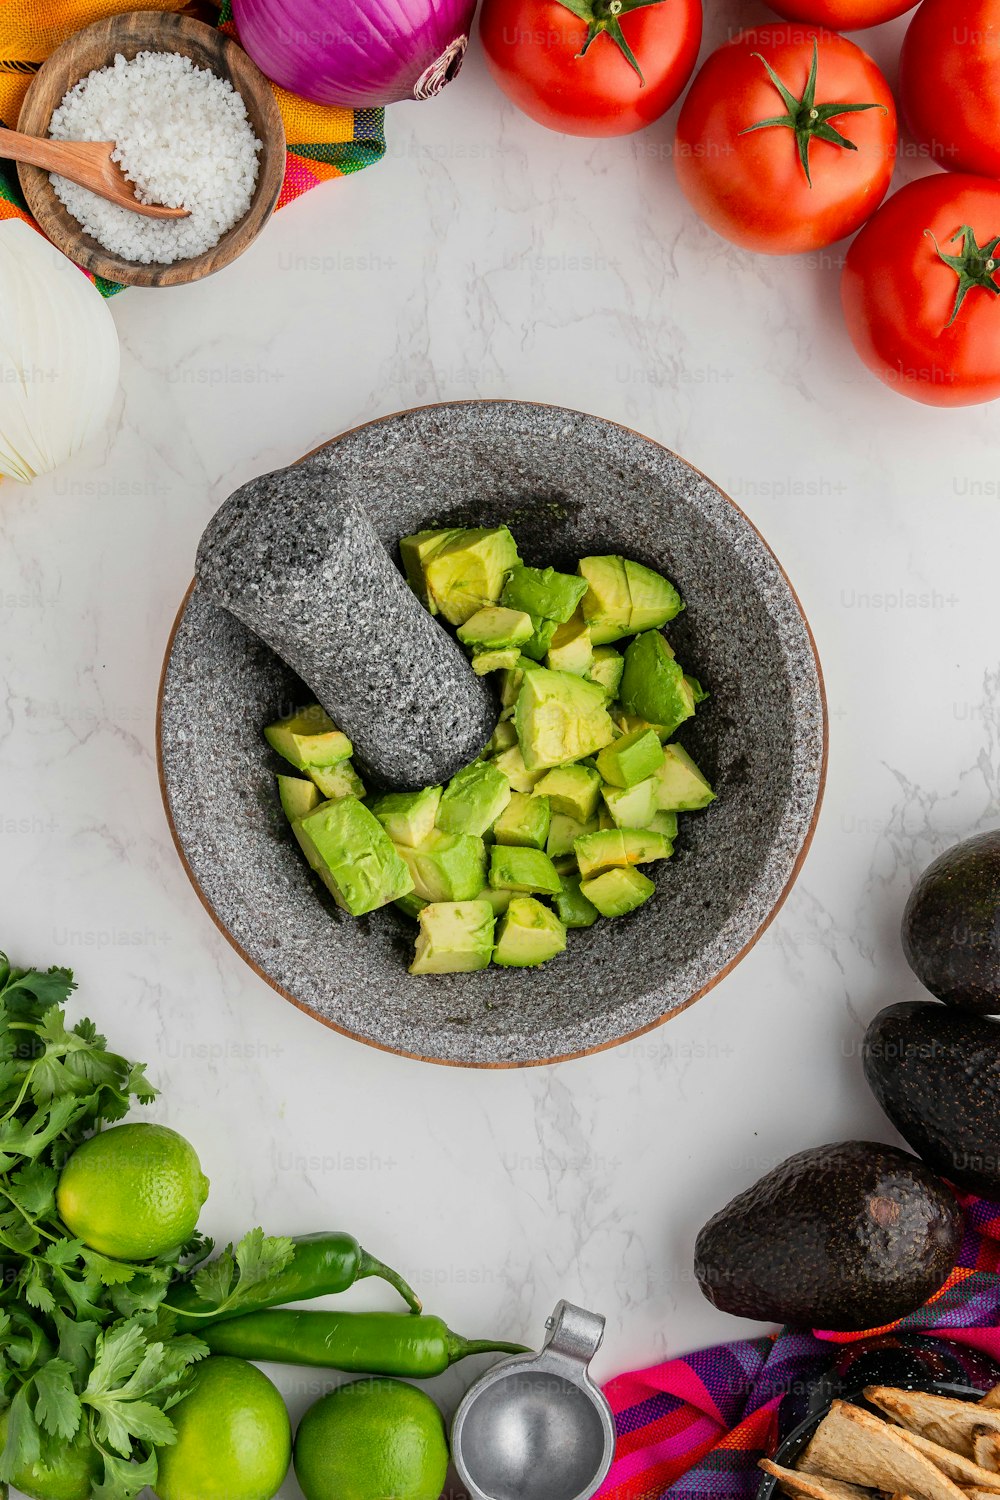 a bowl filled with sliced avocado next to other fruits and vegetables